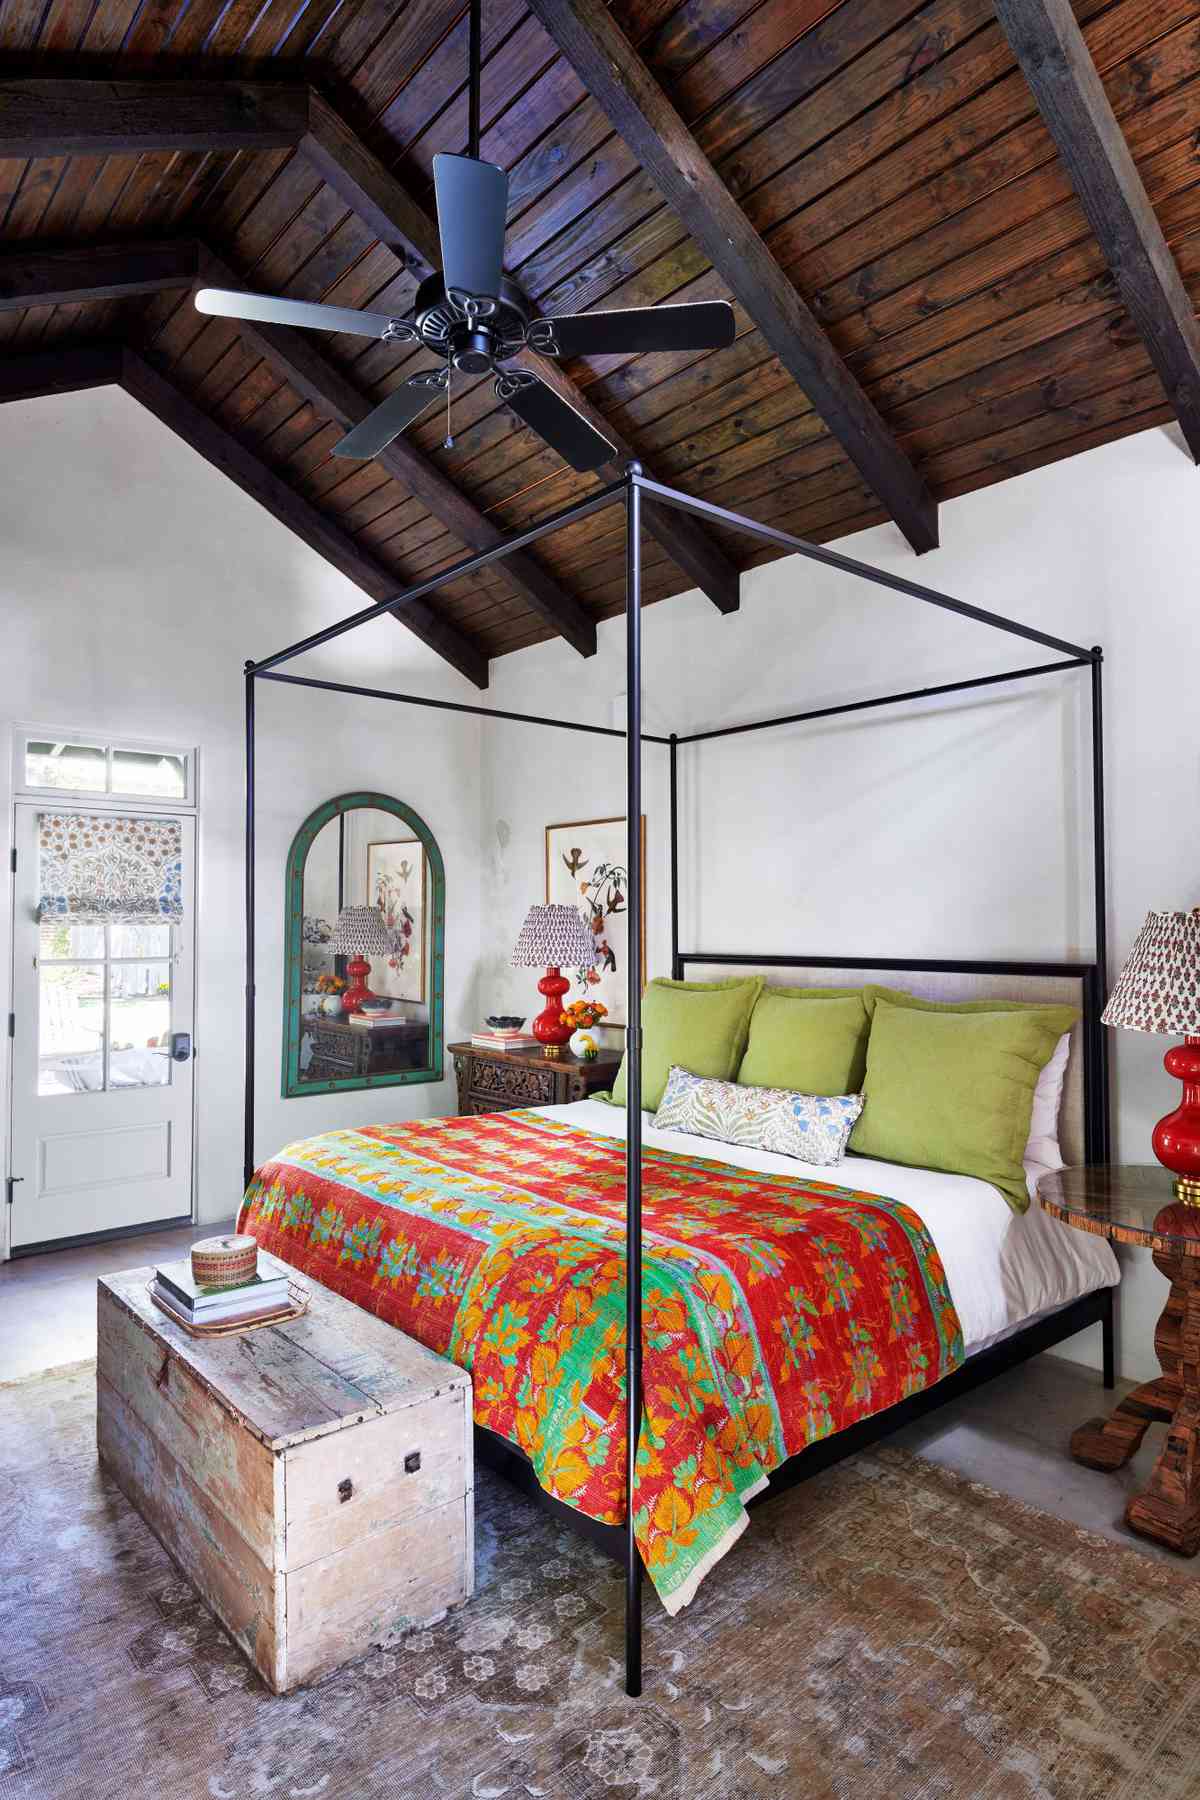 Bedroom with canopy bed and vaulted wood clad ceiling